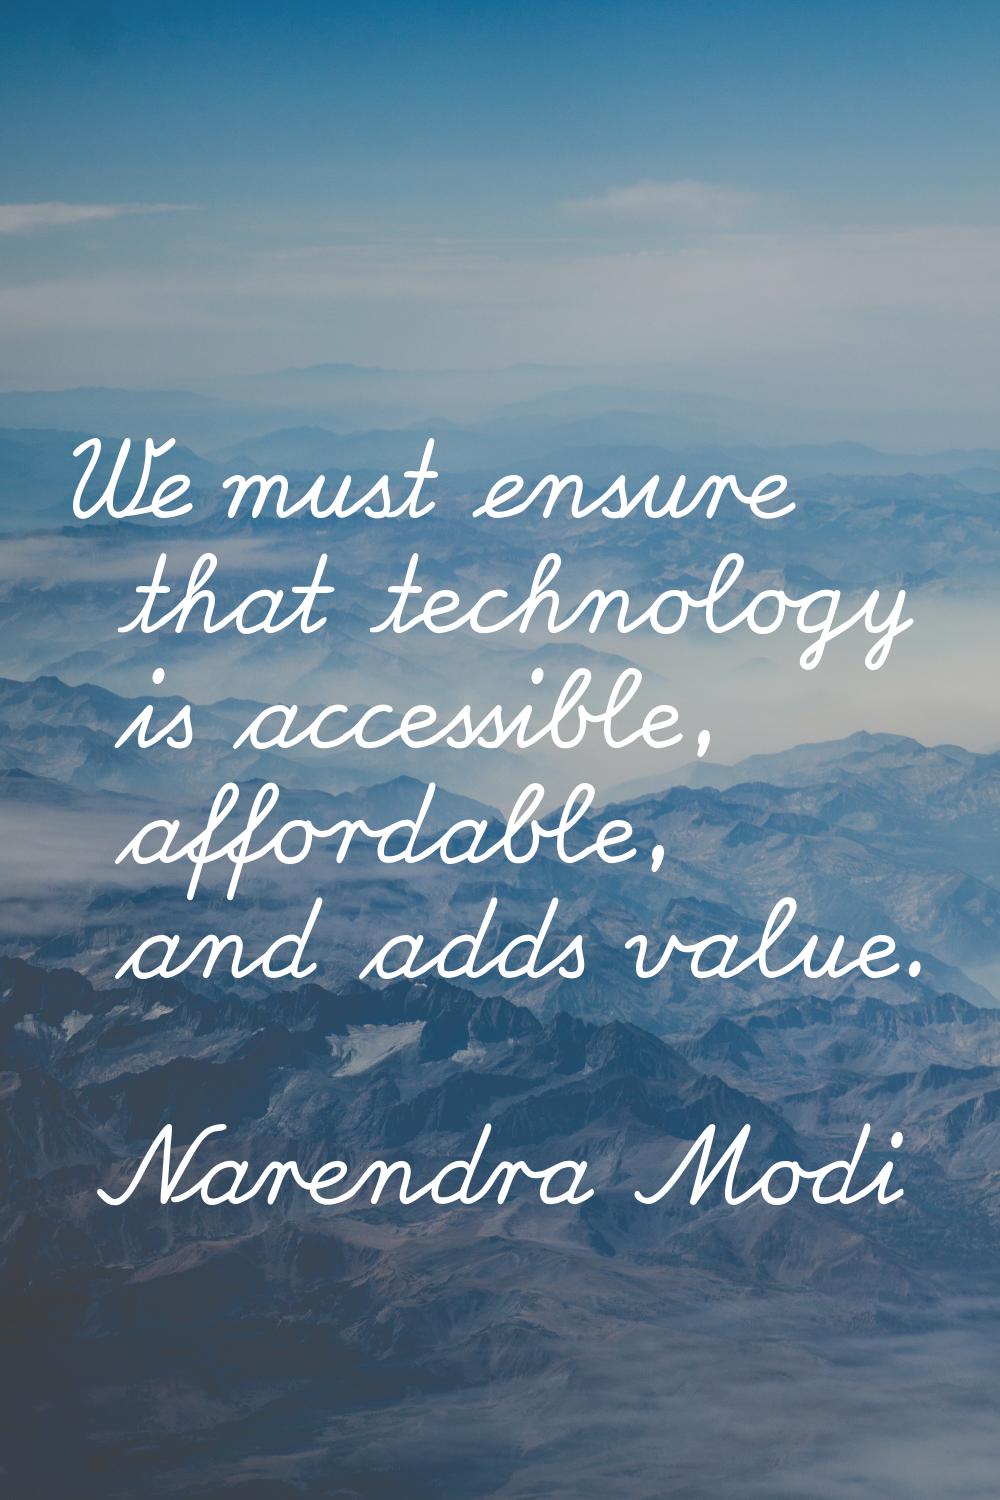 We must ensure that technology is accessible, affordable, and adds value.